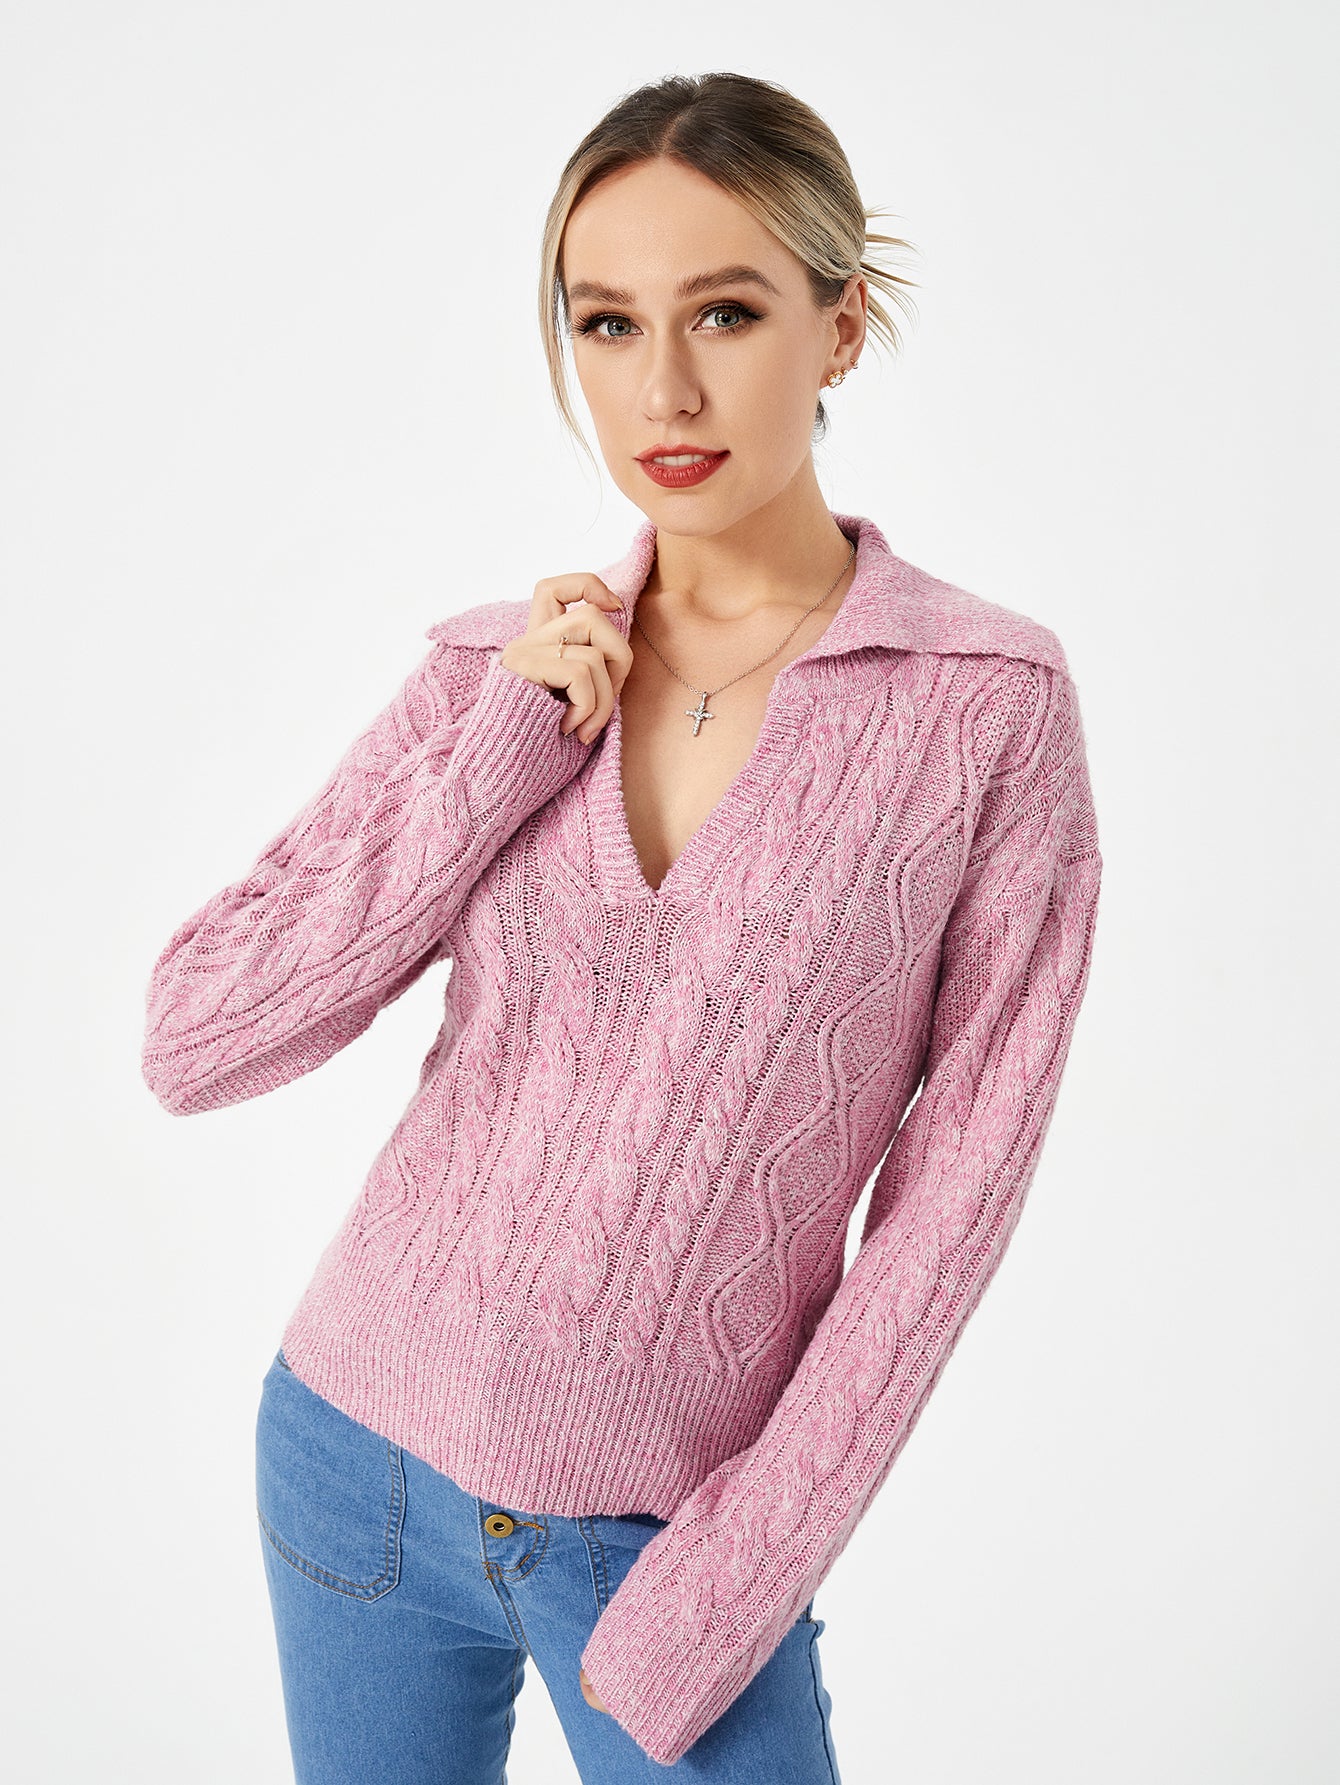 Cozy Up in Style: Women's Warm Casual Lapel Sweater